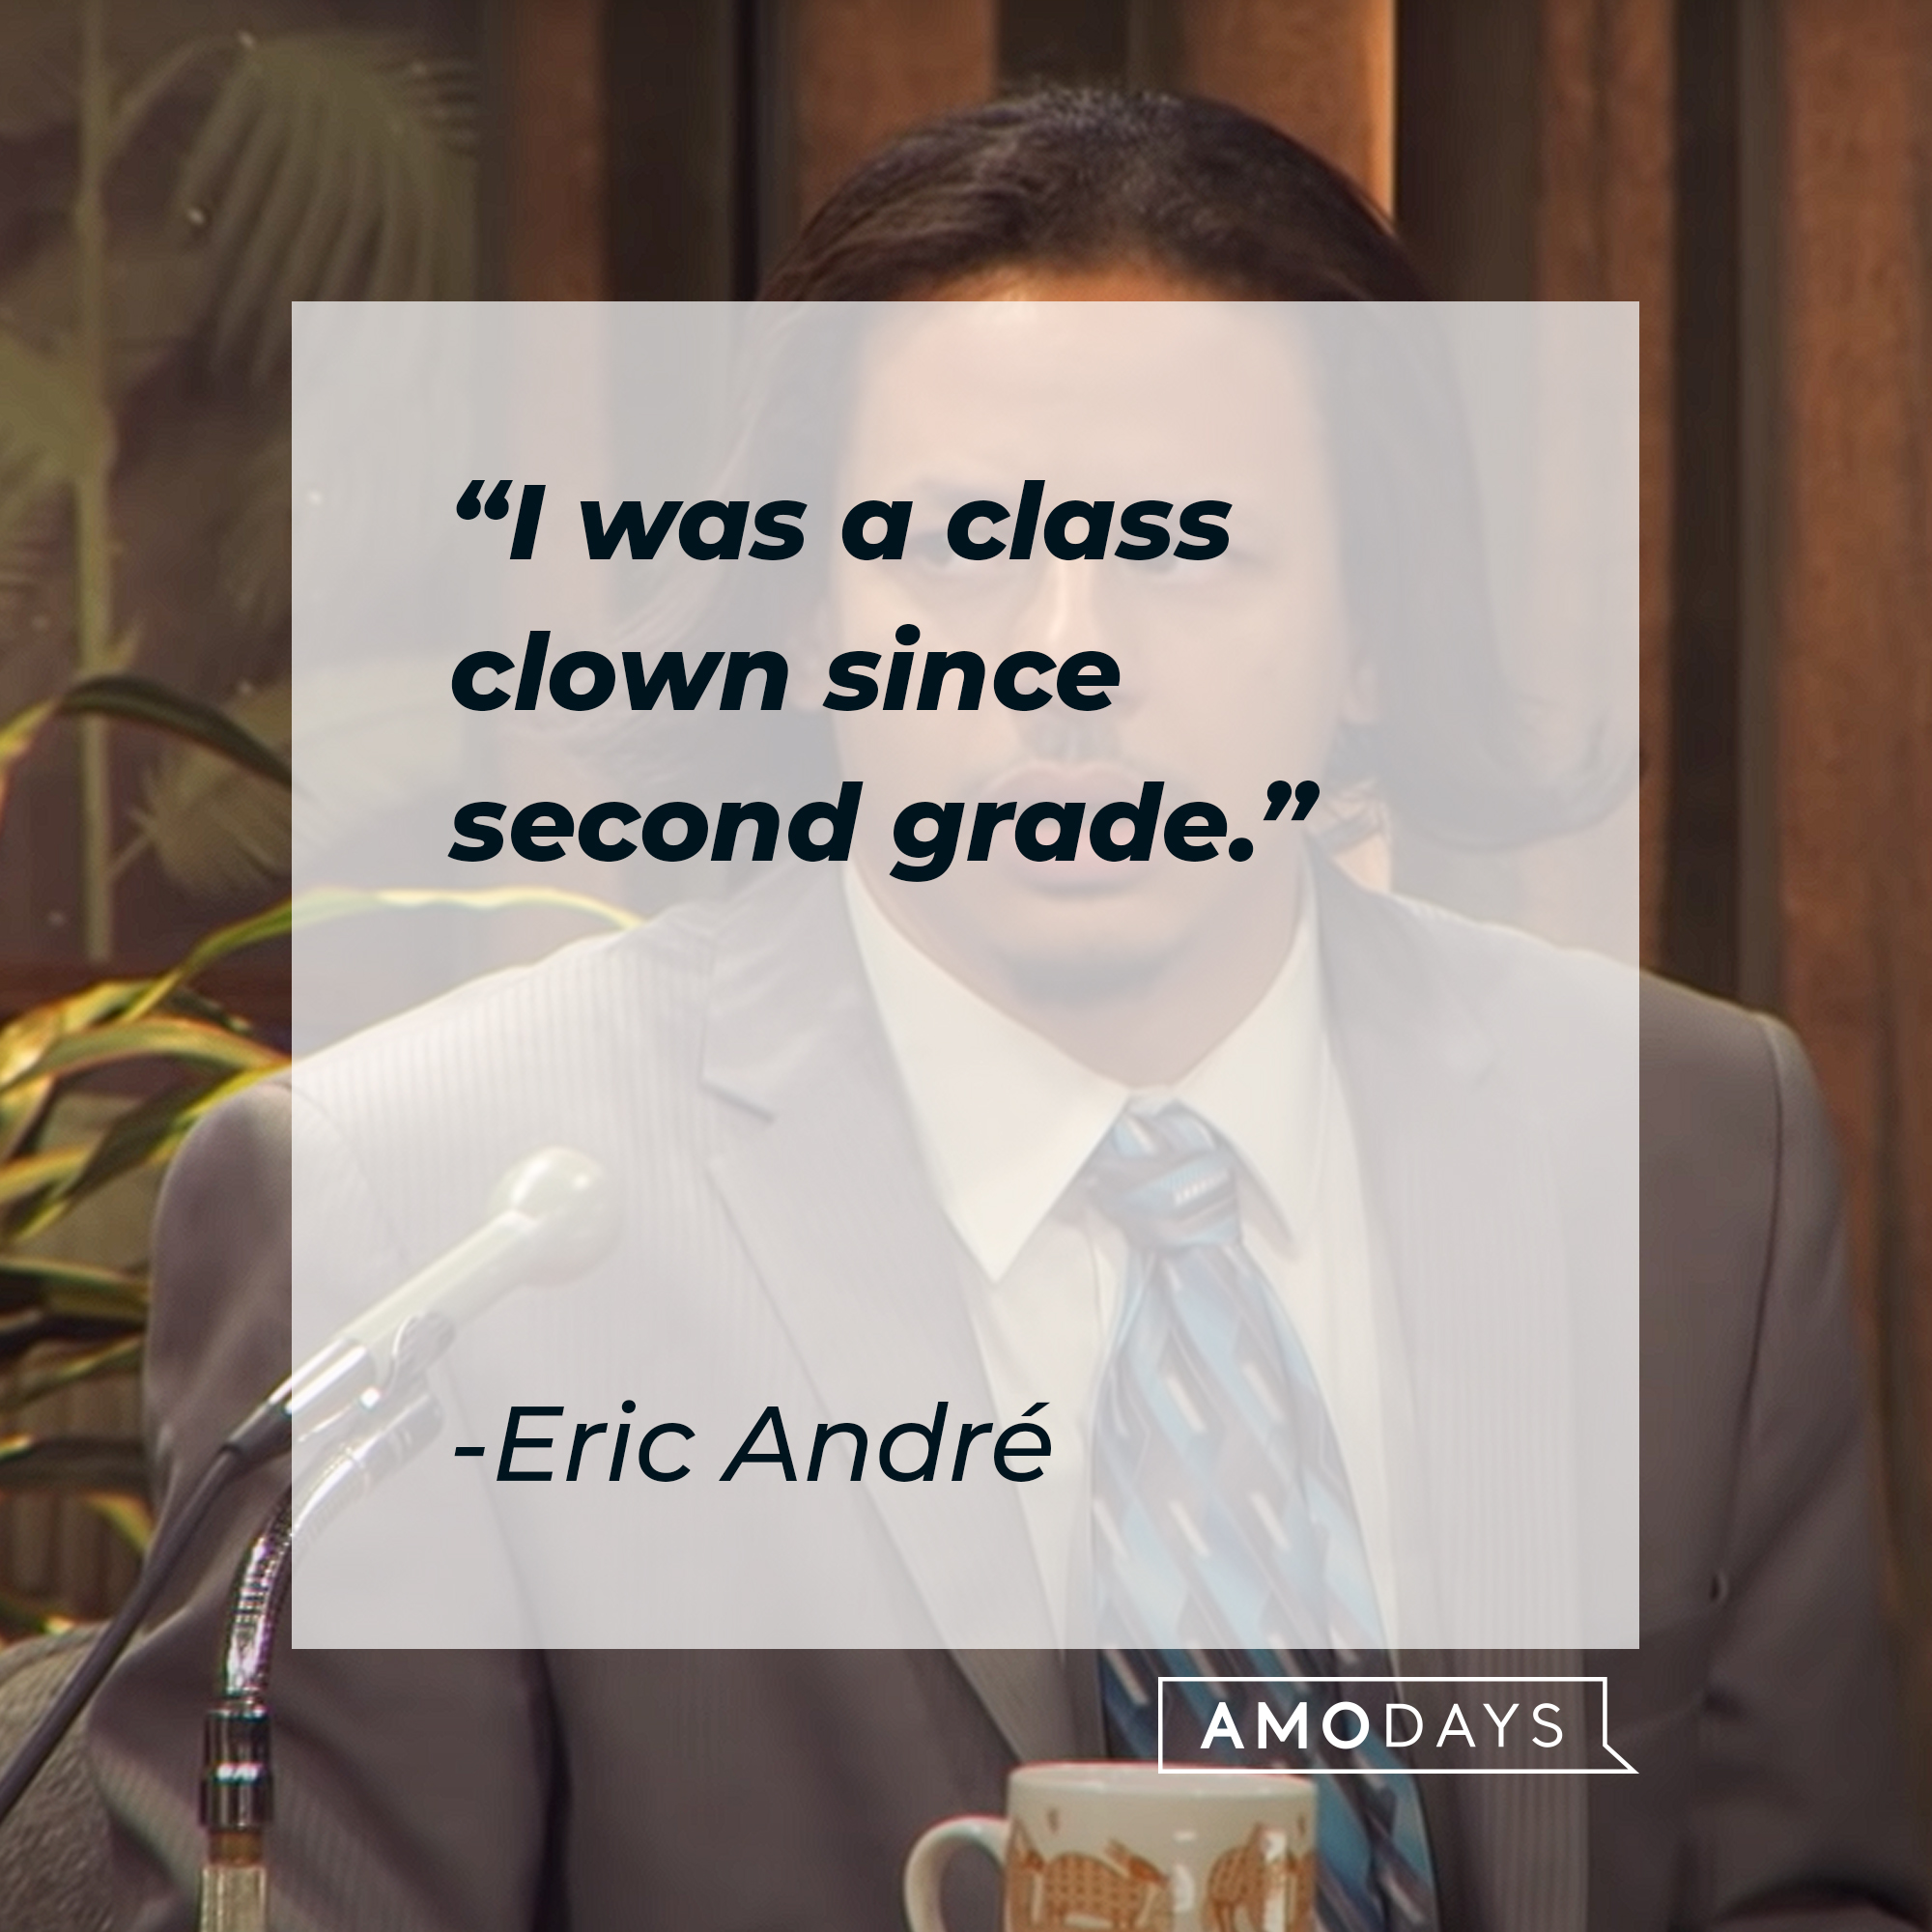 Eric André's quote: "I was a class clown since second grade." | Source: Youtube.com/adultswim